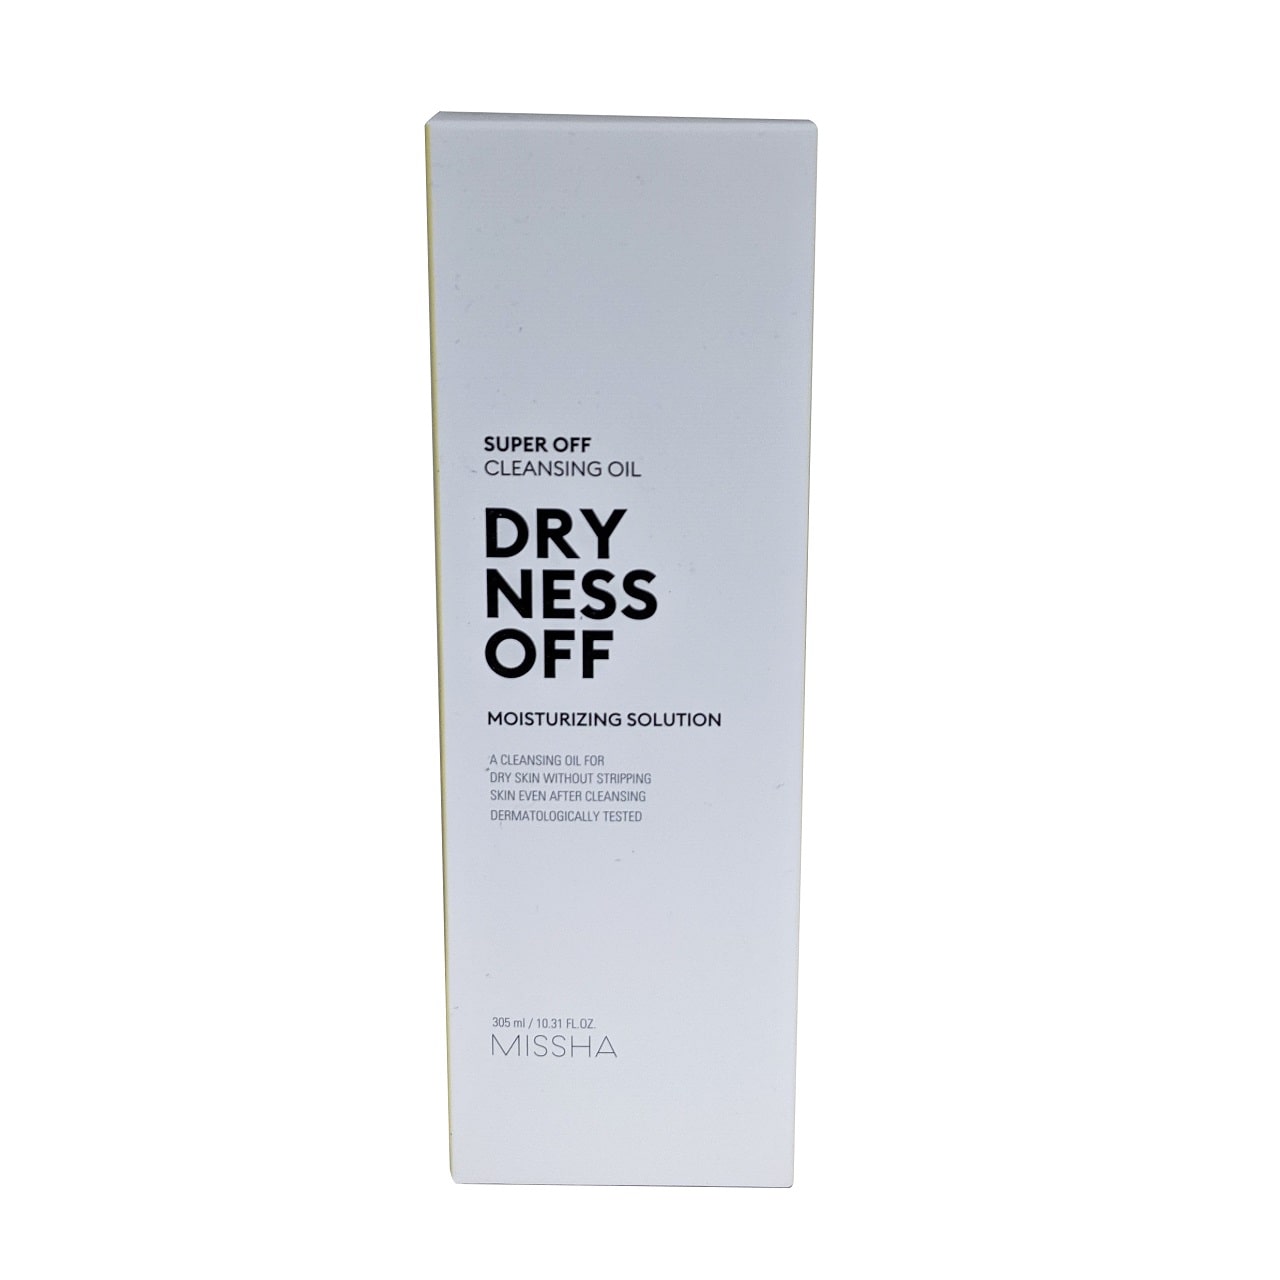 Product label for MISSHA Super Off Cleansing Oil Dryness Off